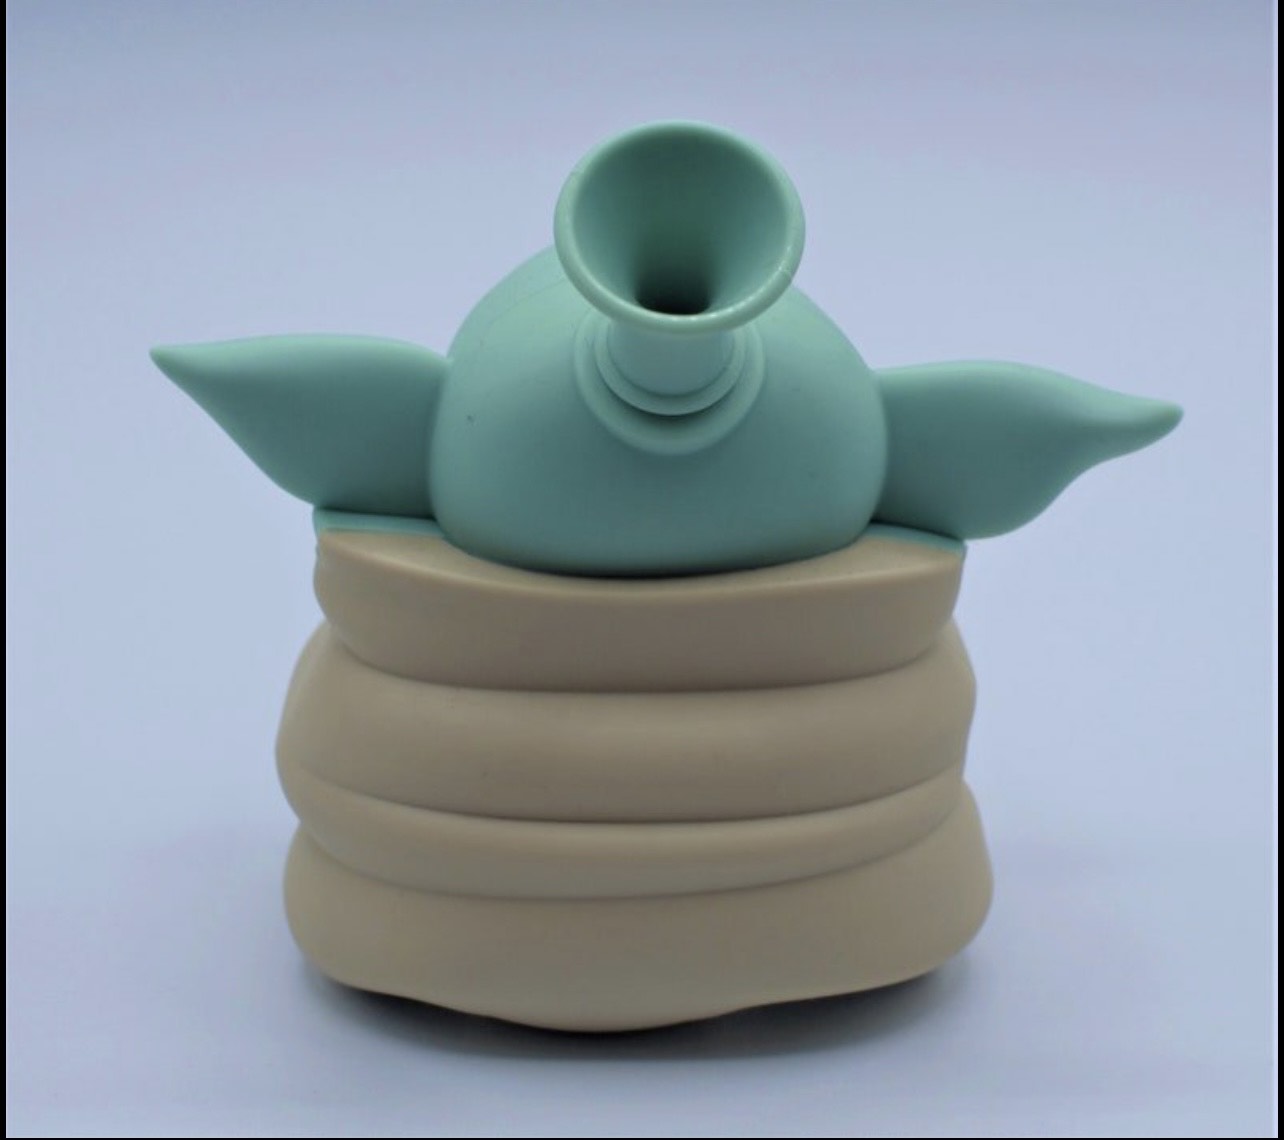 Grogu"The Child" Silicone with 9-Hole Glass Bowl, Jedi Collect.